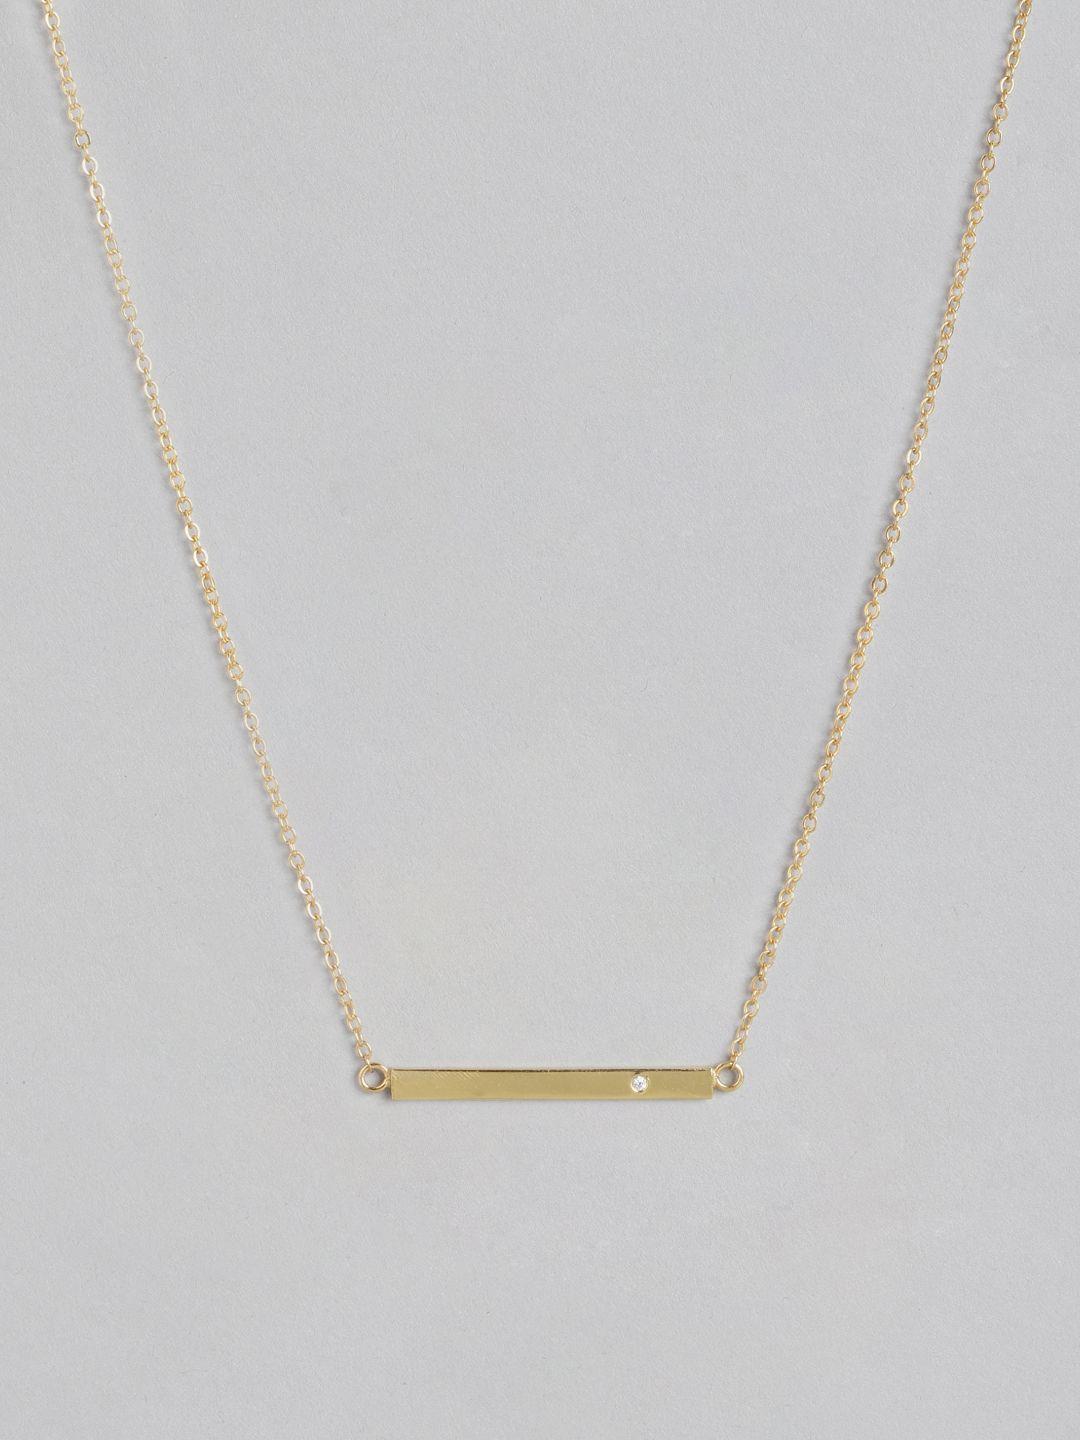 carlton-london-18k-gold-plated-necklace